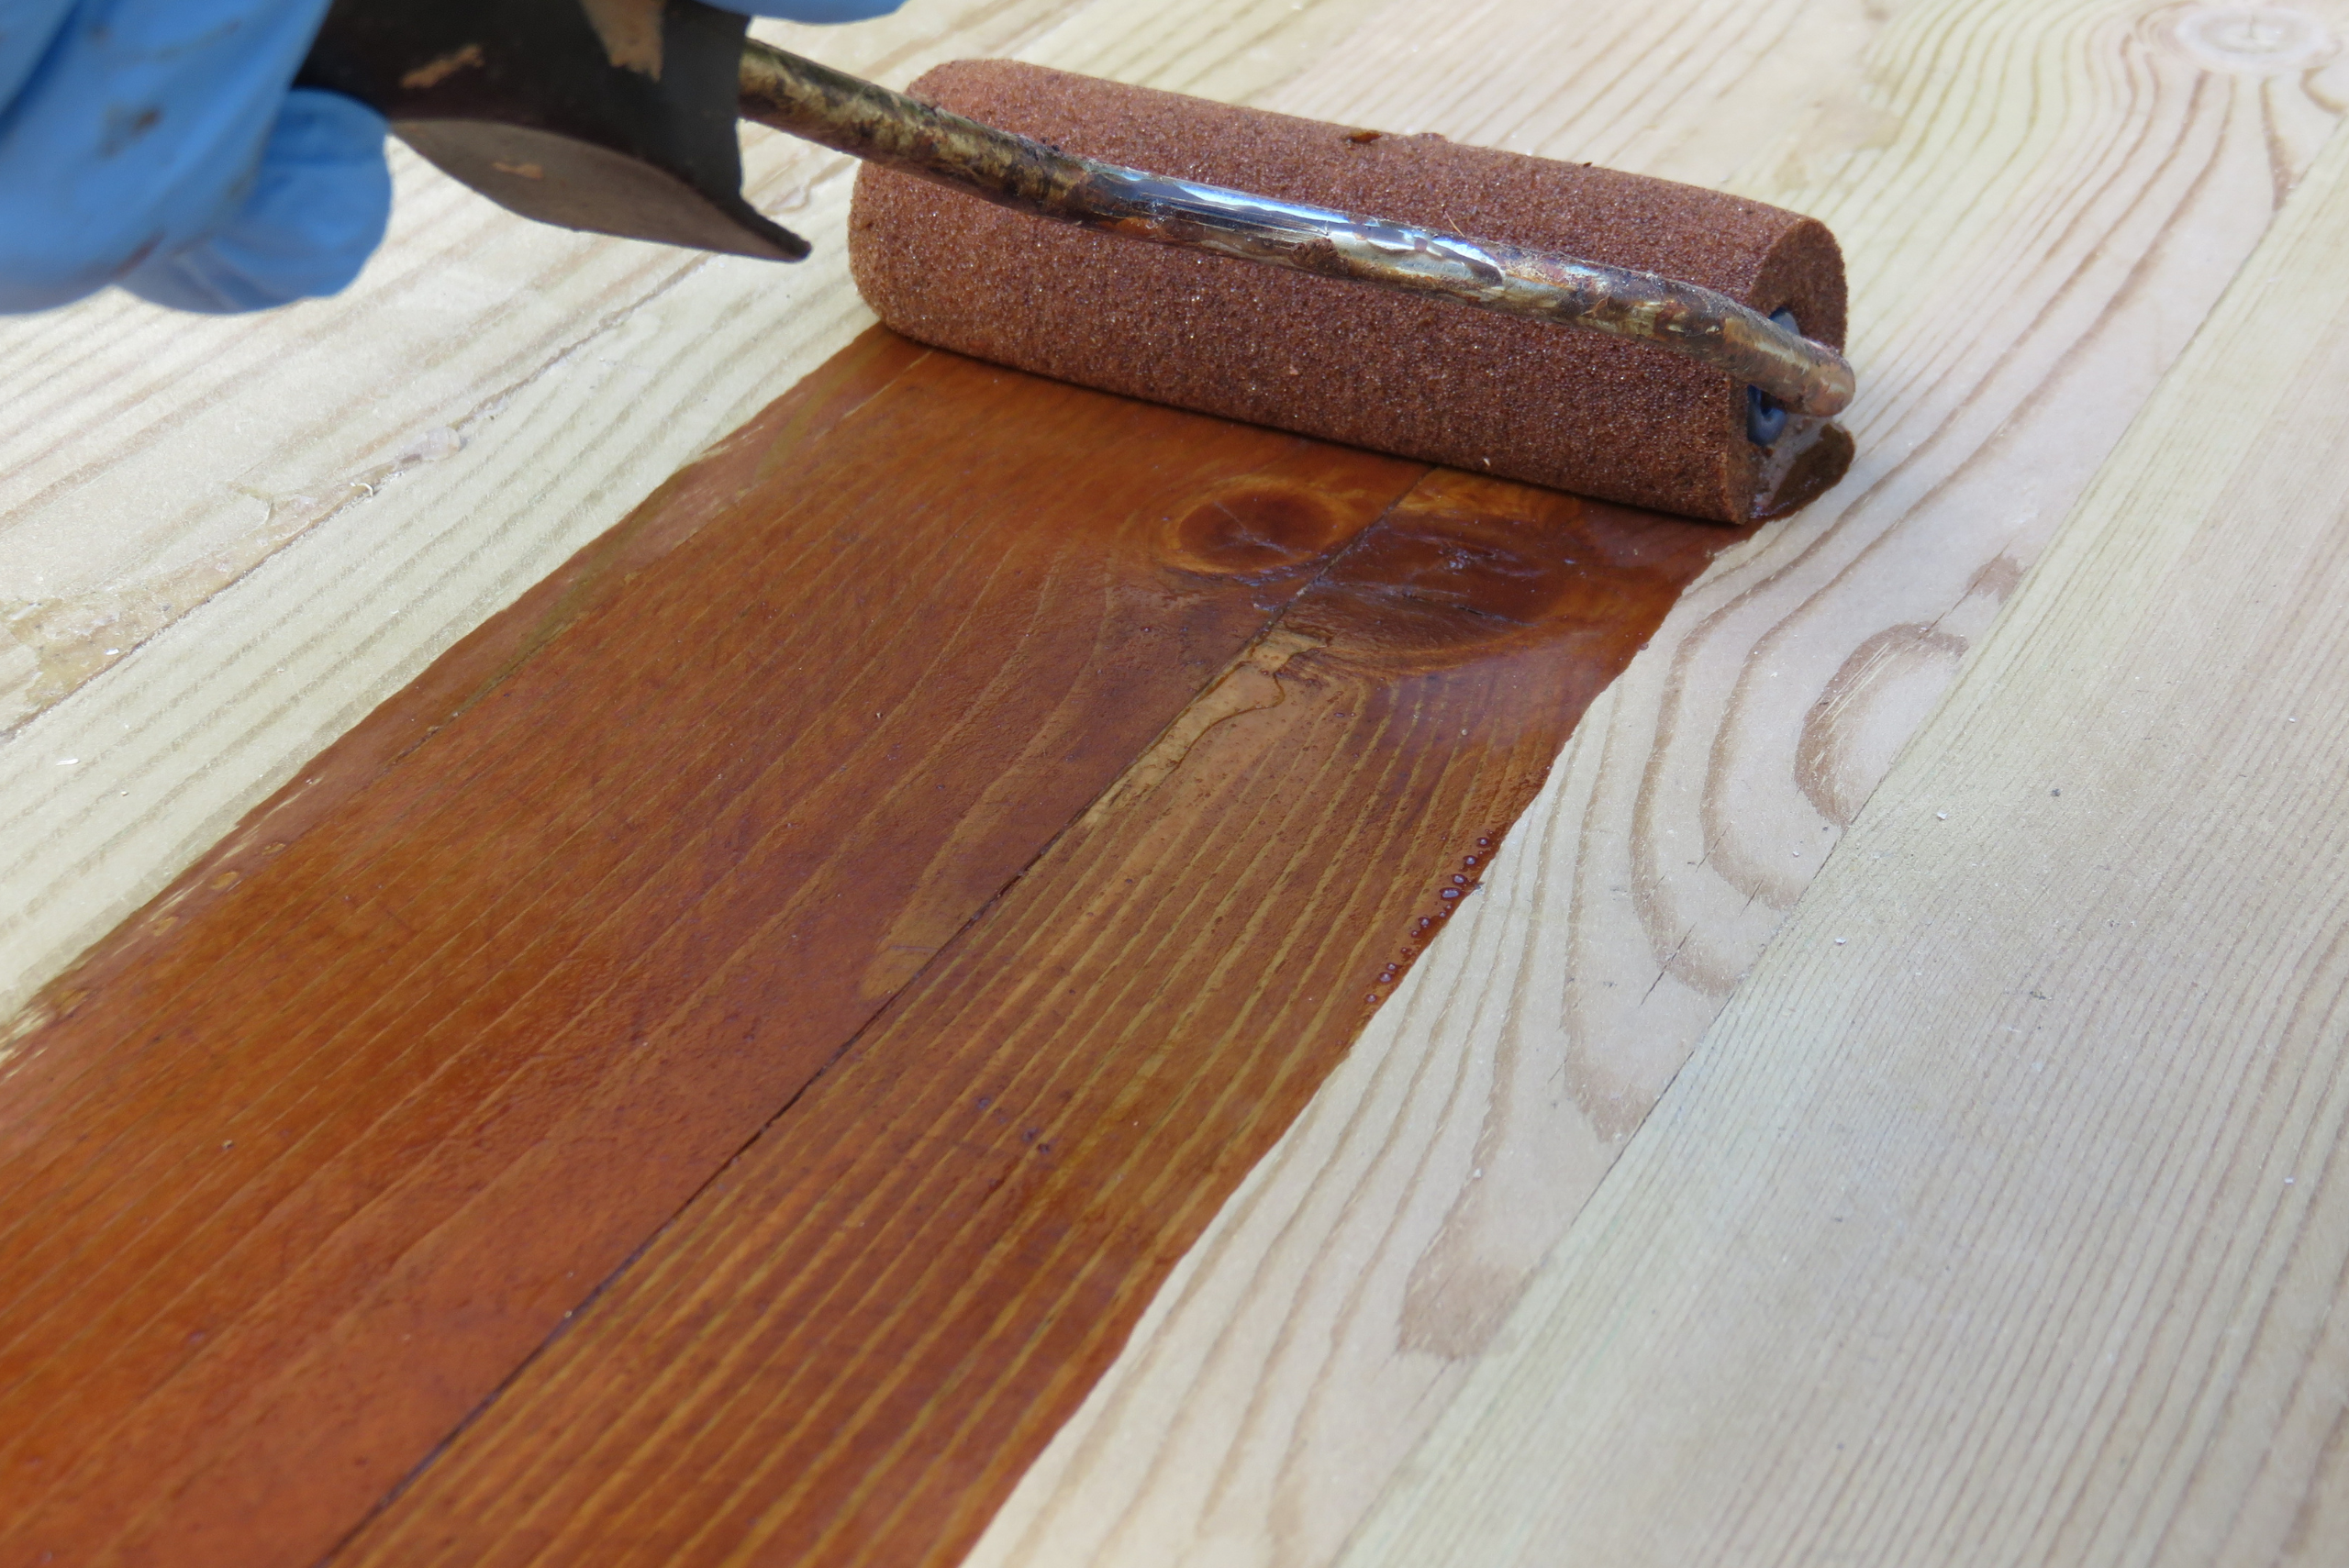 A paint roller being used to apply stain to seal wood.